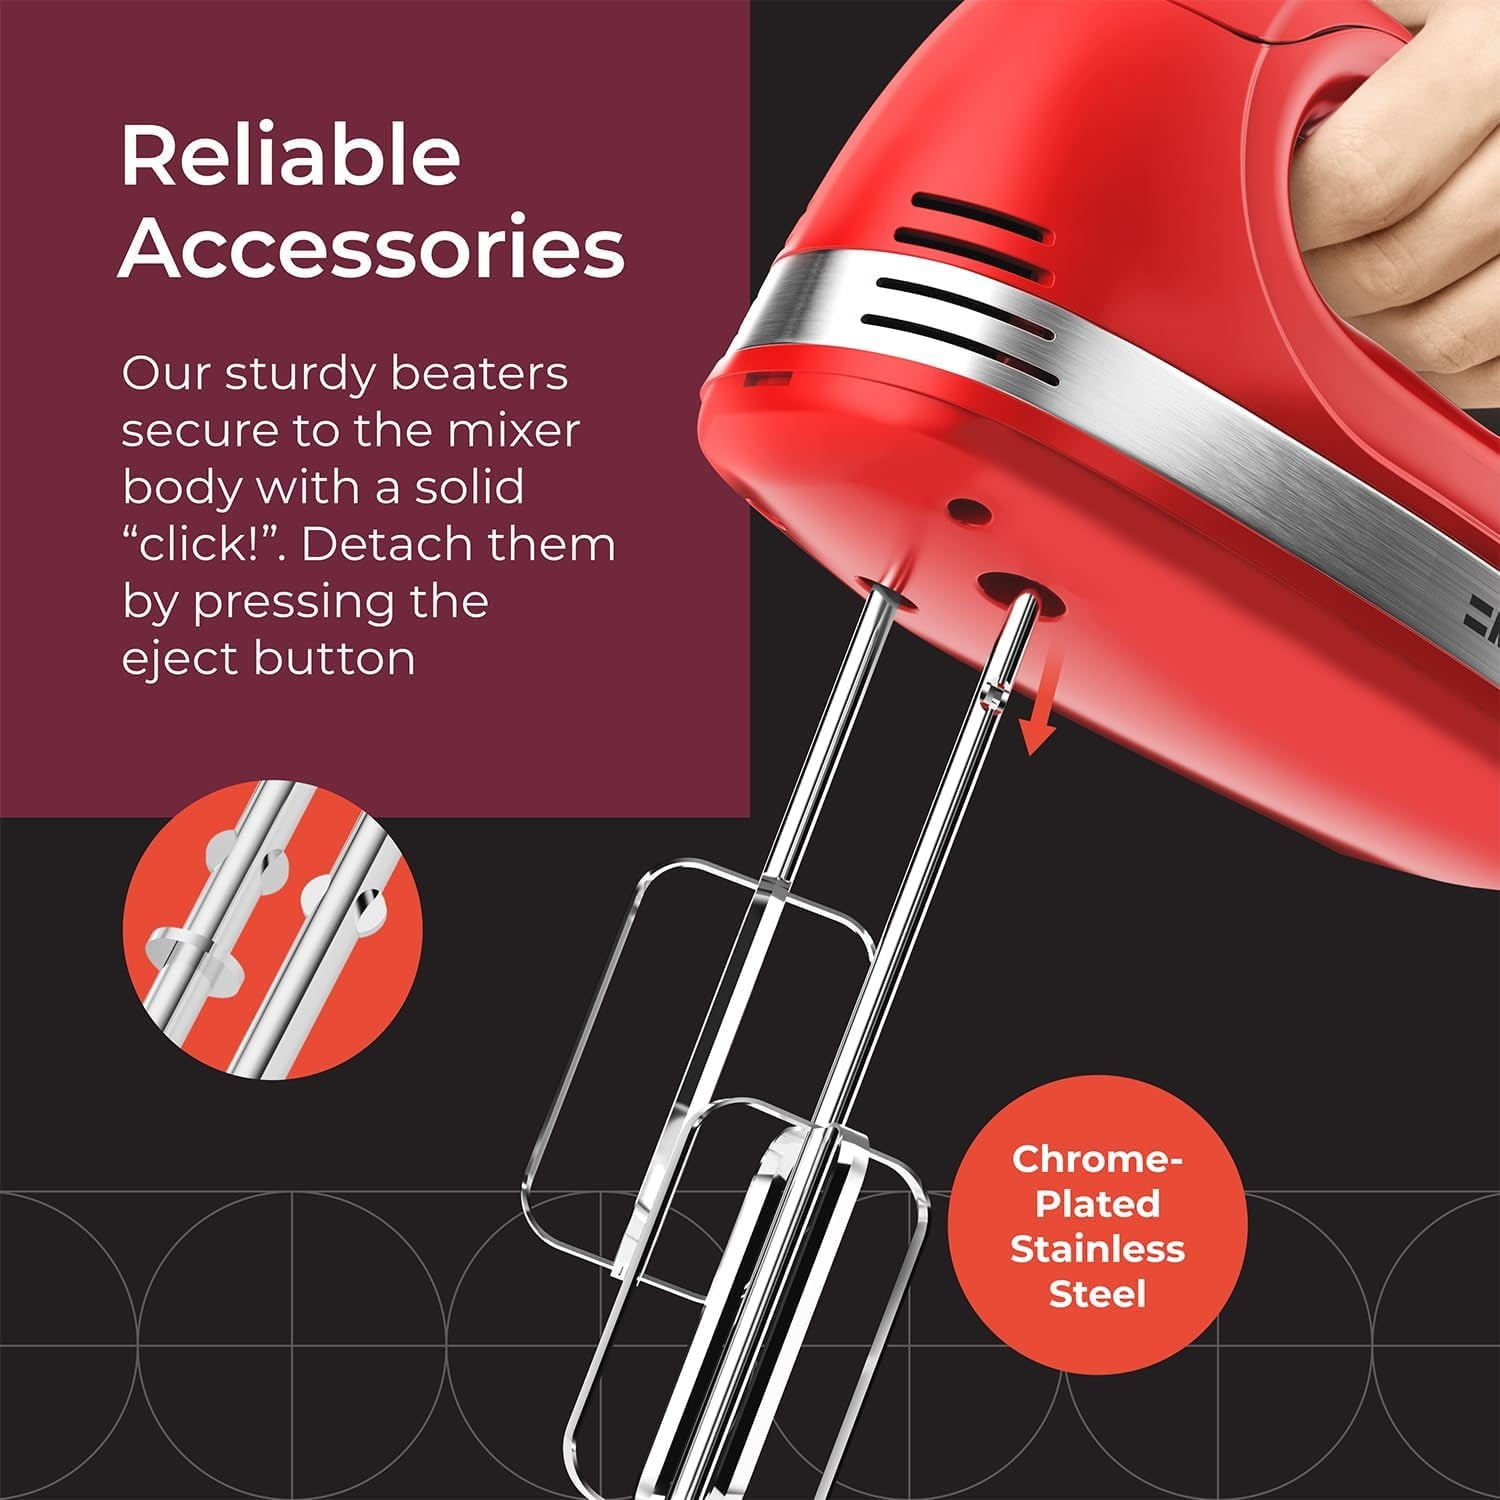 Mueller 5 Speed Electric Hand Mixer with Snap-On Case and 4 Stainless Steel Accessories